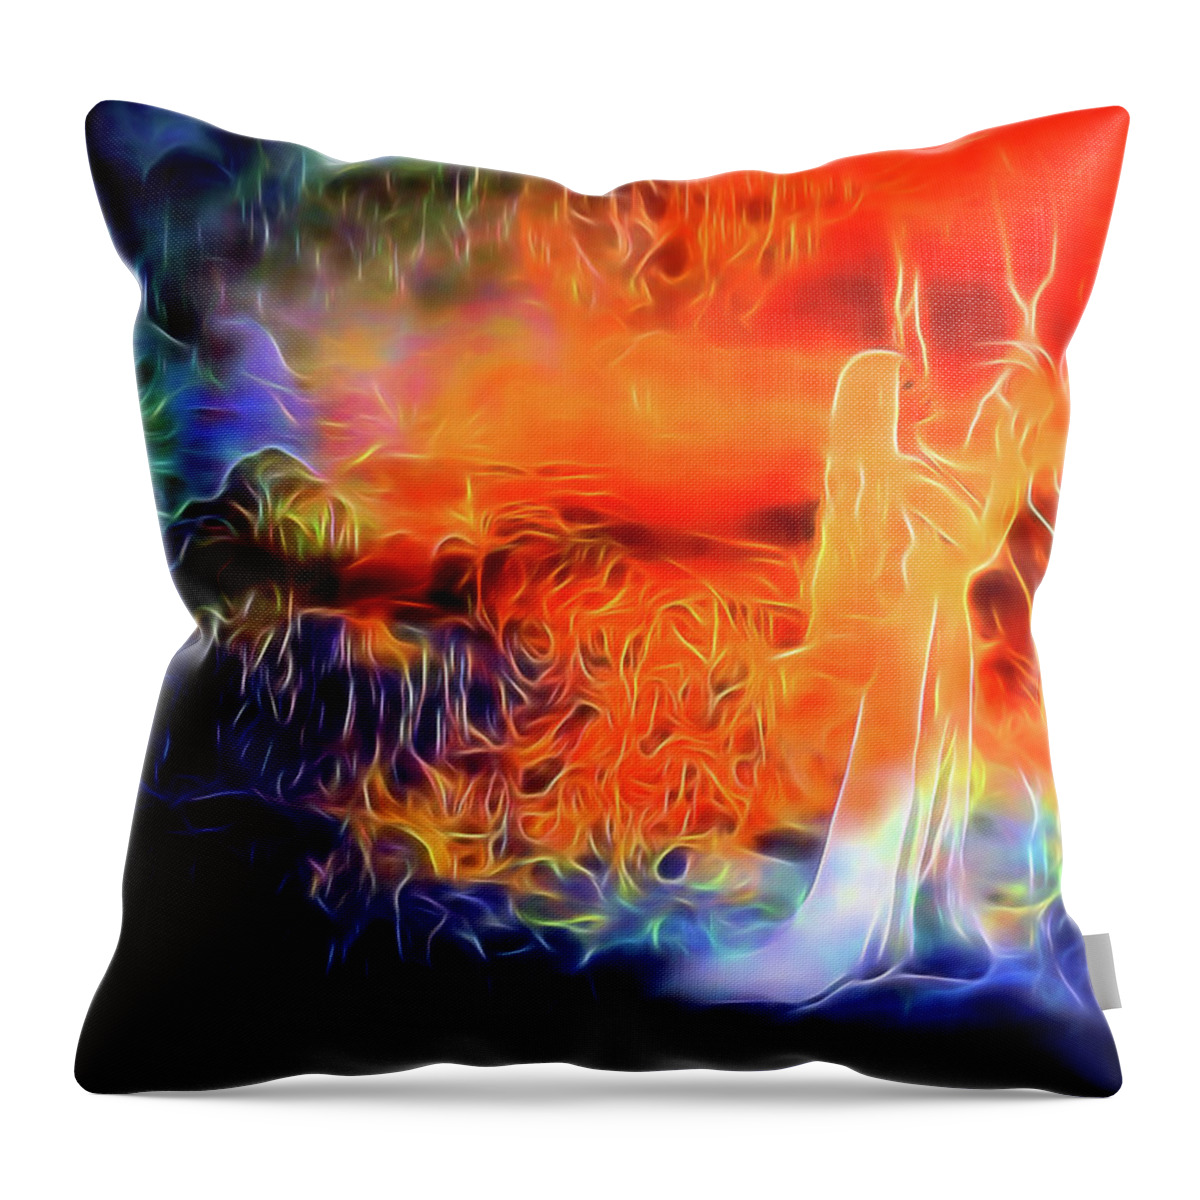 Mother Of Dragons Throw Pillow featuring the digital art Daenerys by Lilia D